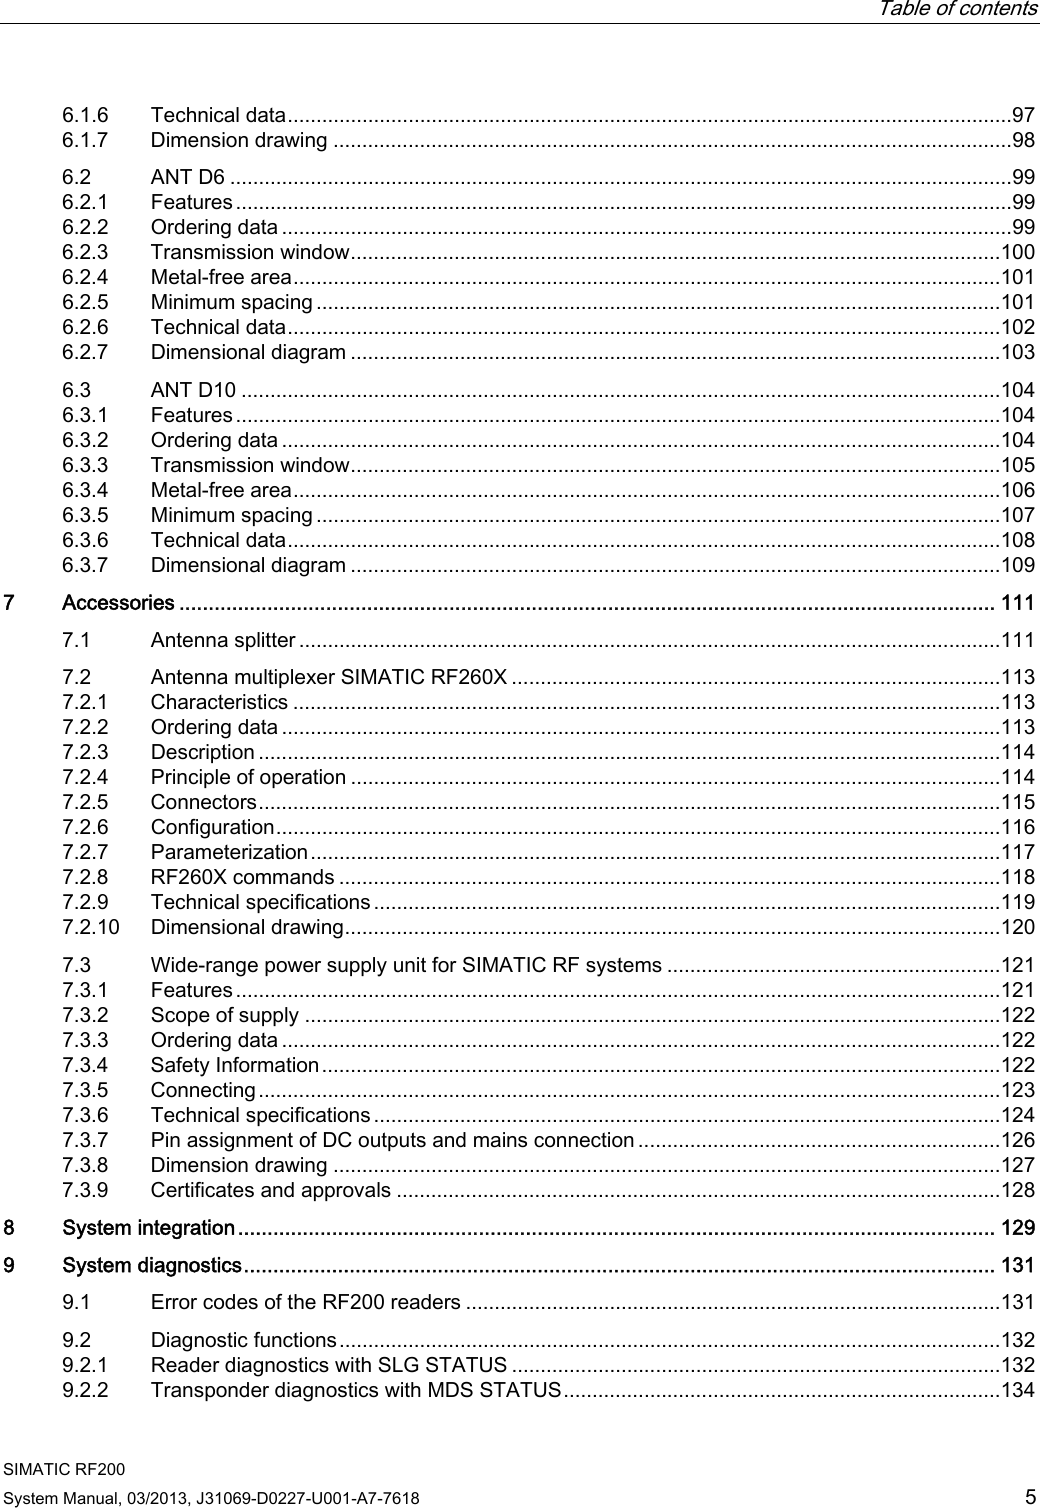   Table of contents   SIMATIC RF200 System Manual, 03/2013, J31069-D0227-U001-A7-7618  5 6.1.6  Technical data..............................................................................................................................97 6.1.7  Dimension drawing ......................................................................................................................98 6.2  ANT D6 ........................................................................................................................................99 6.2.1  Features.......................................................................................................................................99 6.2.2  Ordering data ...............................................................................................................................99 6.2.3  Transmission window.................................................................................................................100 6.2.4  Metal-free area...........................................................................................................................101 6.2.5  Minimum spacing .......................................................................................................................101 6.2.6  Technical data............................................................................................................................102 6.2.7  Dimensional diagram .................................................................................................................103 6.3  ANT D10 ....................................................................................................................................104 6.3.1  Features.....................................................................................................................................104 6.3.2  Ordering data .............................................................................................................................104 6.3.3  Transmission window.................................................................................................................105 6.3.4  Metal-free area...........................................................................................................................106 6.3.5  Minimum spacing .......................................................................................................................107 6.3.6  Technical data............................................................................................................................108 6.3.7  Dimensional diagram .................................................................................................................109 7  Accessories ........................................................................................................................................... 111 7.1  Antenna splitter ..........................................................................................................................111 7.2  Antenna multiplexer SIMATIC RF260X .....................................................................................113 7.2.1  Characteristics ...........................................................................................................................113 7.2.2  Ordering data .............................................................................................................................113 7.2.3  Description .................................................................................................................................114 7.2.4  Principle of operation .................................................................................................................114 7.2.5  Connectors.................................................................................................................................115 7.2.6  Configuration..............................................................................................................................116 7.2.7  Parameterization........................................................................................................................117 7.2.8  RF260X commands ...................................................................................................................118 7.2.9  Technical specifications .............................................................................................................119 7.2.10  Dimensional drawing..................................................................................................................120 7.3  Wide-range power supply unit for SIMATIC RF systems ..........................................................121 7.3.1  Features.....................................................................................................................................121 7.3.2  Scope of supply .........................................................................................................................122 7.3.3  Ordering data .............................................................................................................................122 7.3.4  Safety Information......................................................................................................................122 7.3.5  Connecting.................................................................................................................................123 7.3.6  Technical specifications .............................................................................................................124 7.3.7  Pin assignment of DC outputs and mains connection ...............................................................126 7.3.8  Dimension drawing ....................................................................................................................127 7.3.9  Certificates and approvals .........................................................................................................128 8  System integration................................................................................................................................. 129 9  System diagnostics................................................................................................................................ 131 9.1  Error codes of the RF200 readers .............................................................................................131 9.2  Diagnostic functions...................................................................................................................132 9.2.1  Reader diagnostics with SLG STATUS .....................................................................................132 9.2.2  Transponder diagnostics with MDS STATUS............................................................................134 